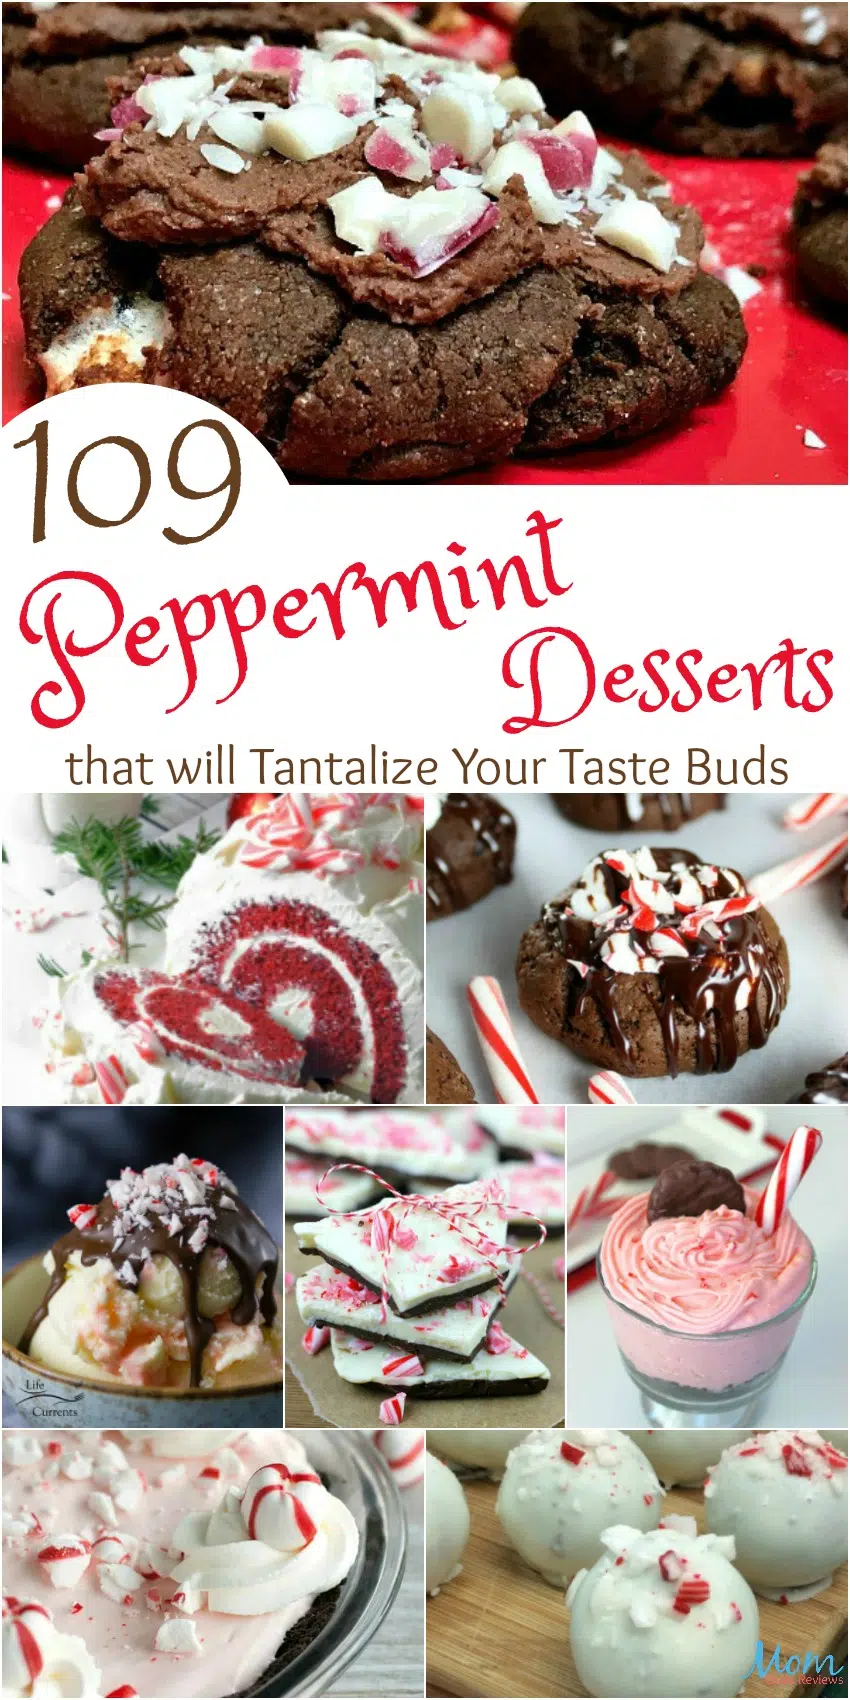 109 Peppermint Desserts that will Tantalize Your Taste Buds #recipes #desserts #sweets #peppermint #yummy 